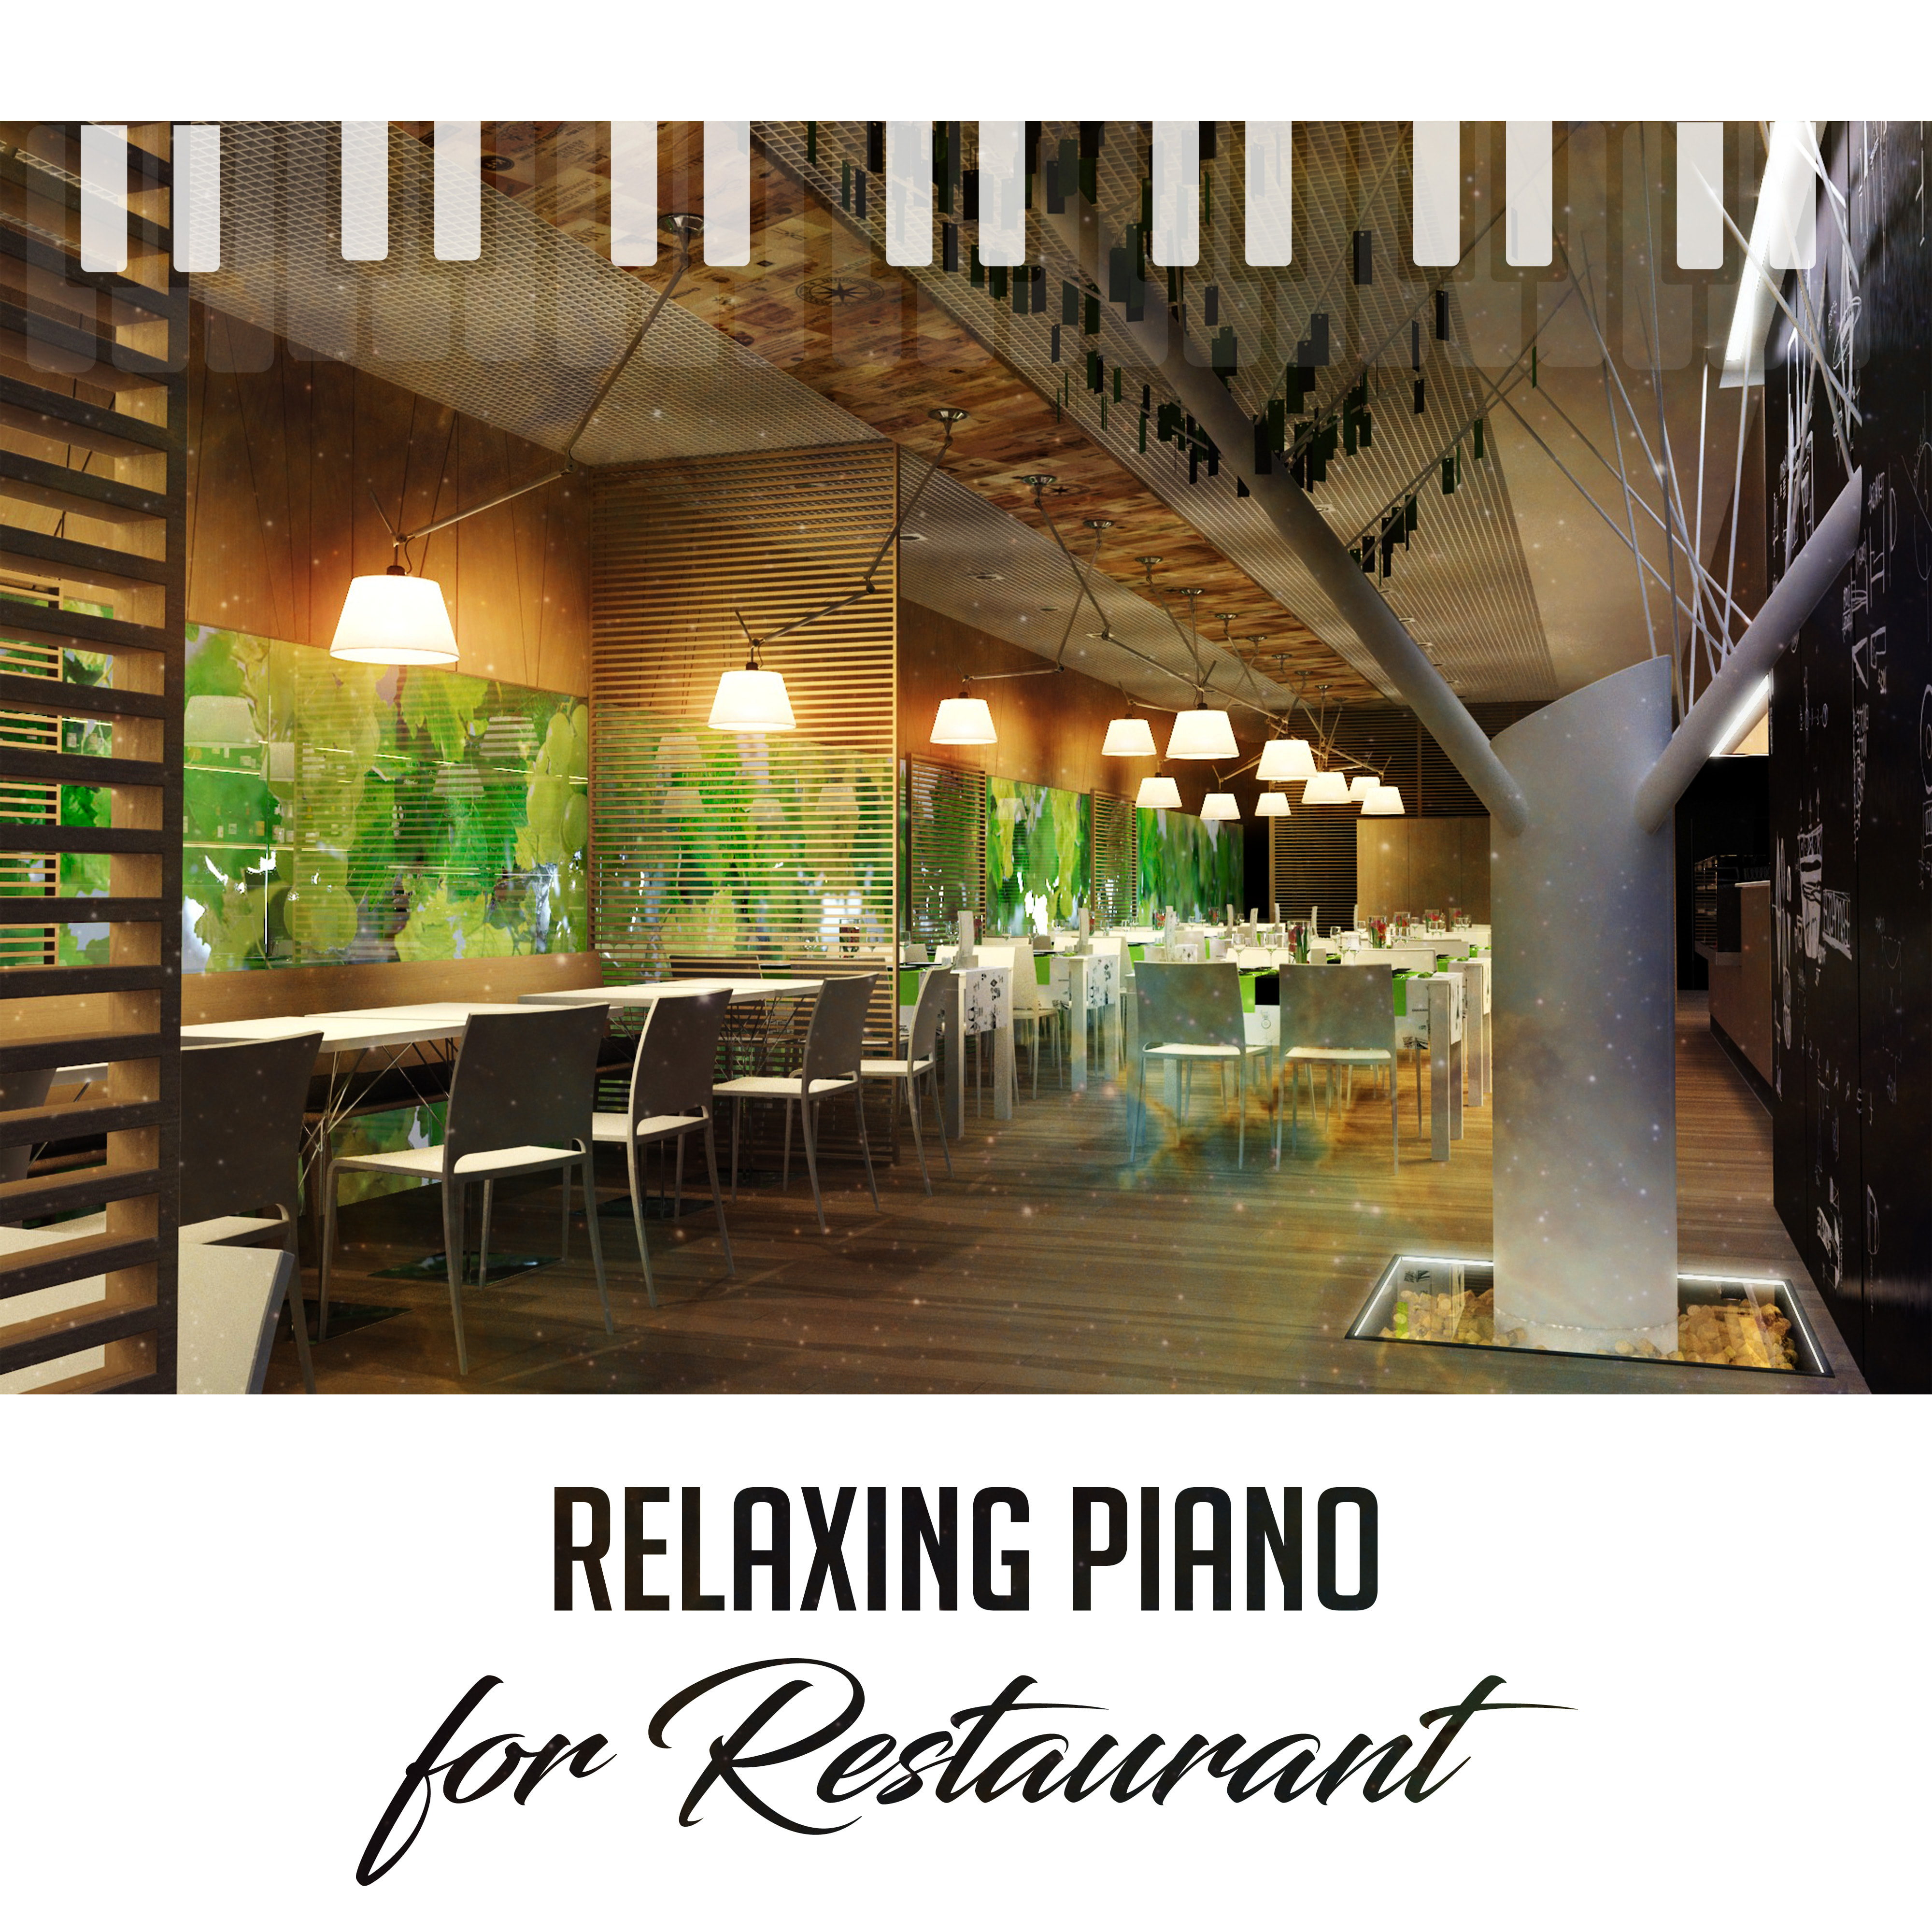 Relaxing Piano for Restaurant  Coffee Talk, Chilled Jazz, Dinner with Friends, Smooth Jazz for Relaxation, Instrumental Sounds, Peaceful Jazz, Gentle Piano